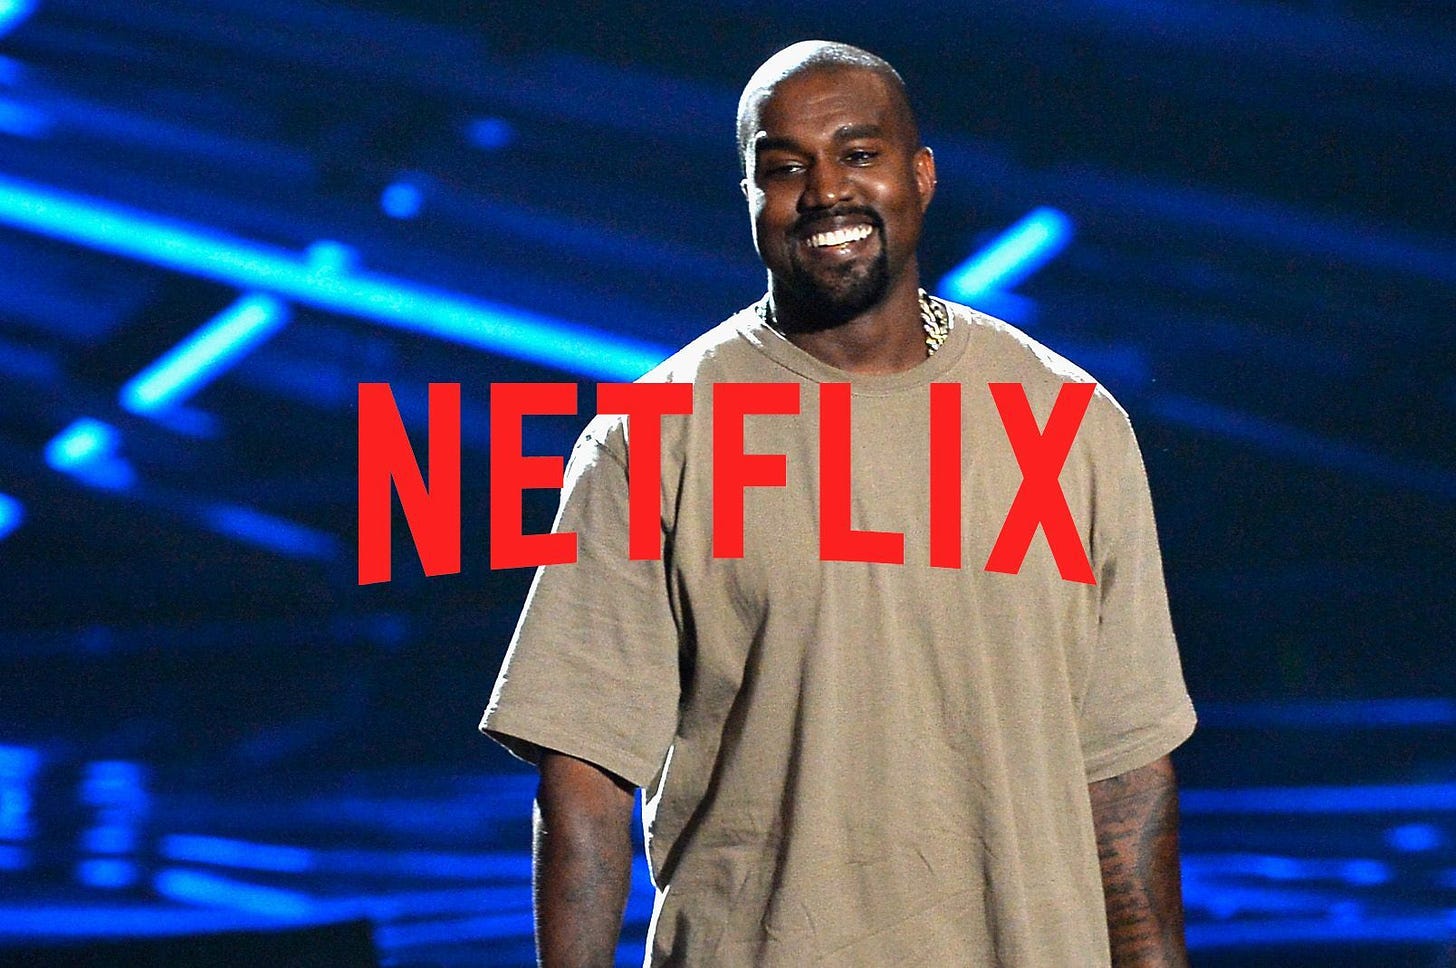 A Netflix docuseries about Kanye West is reportedly on the way